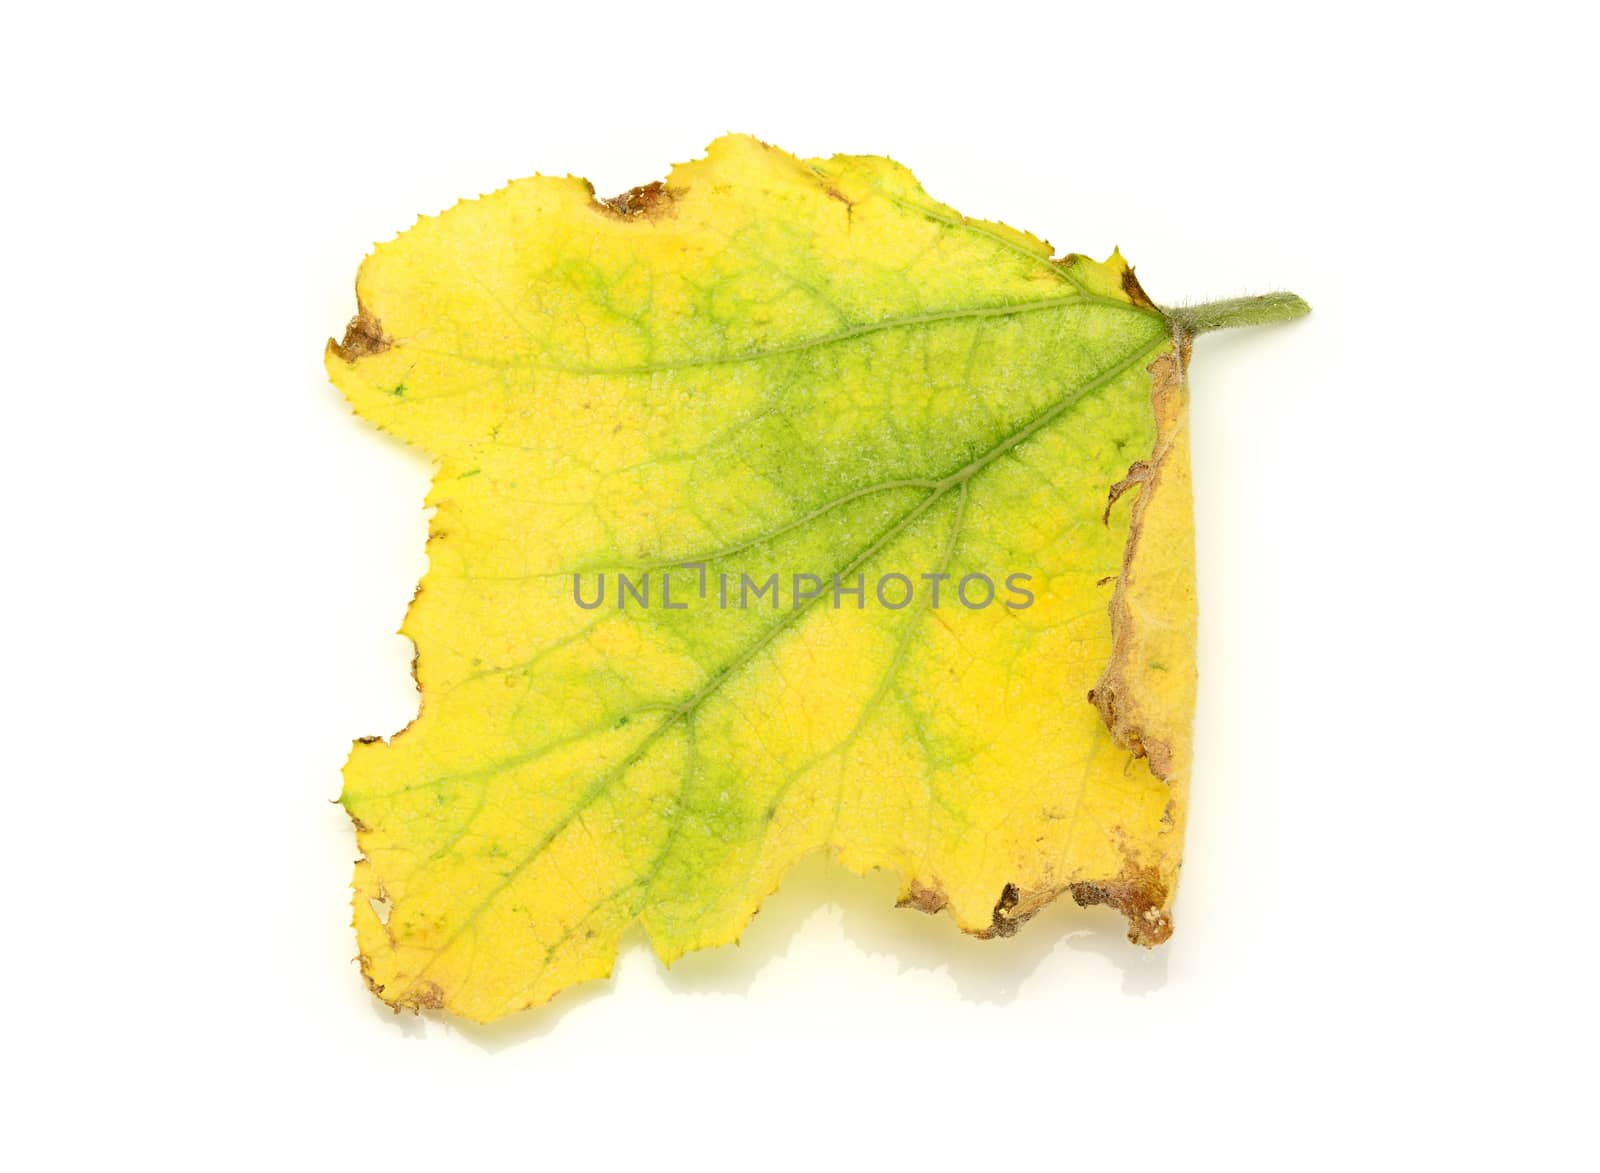 Yellowing and dying pumpkin leaves on a white background